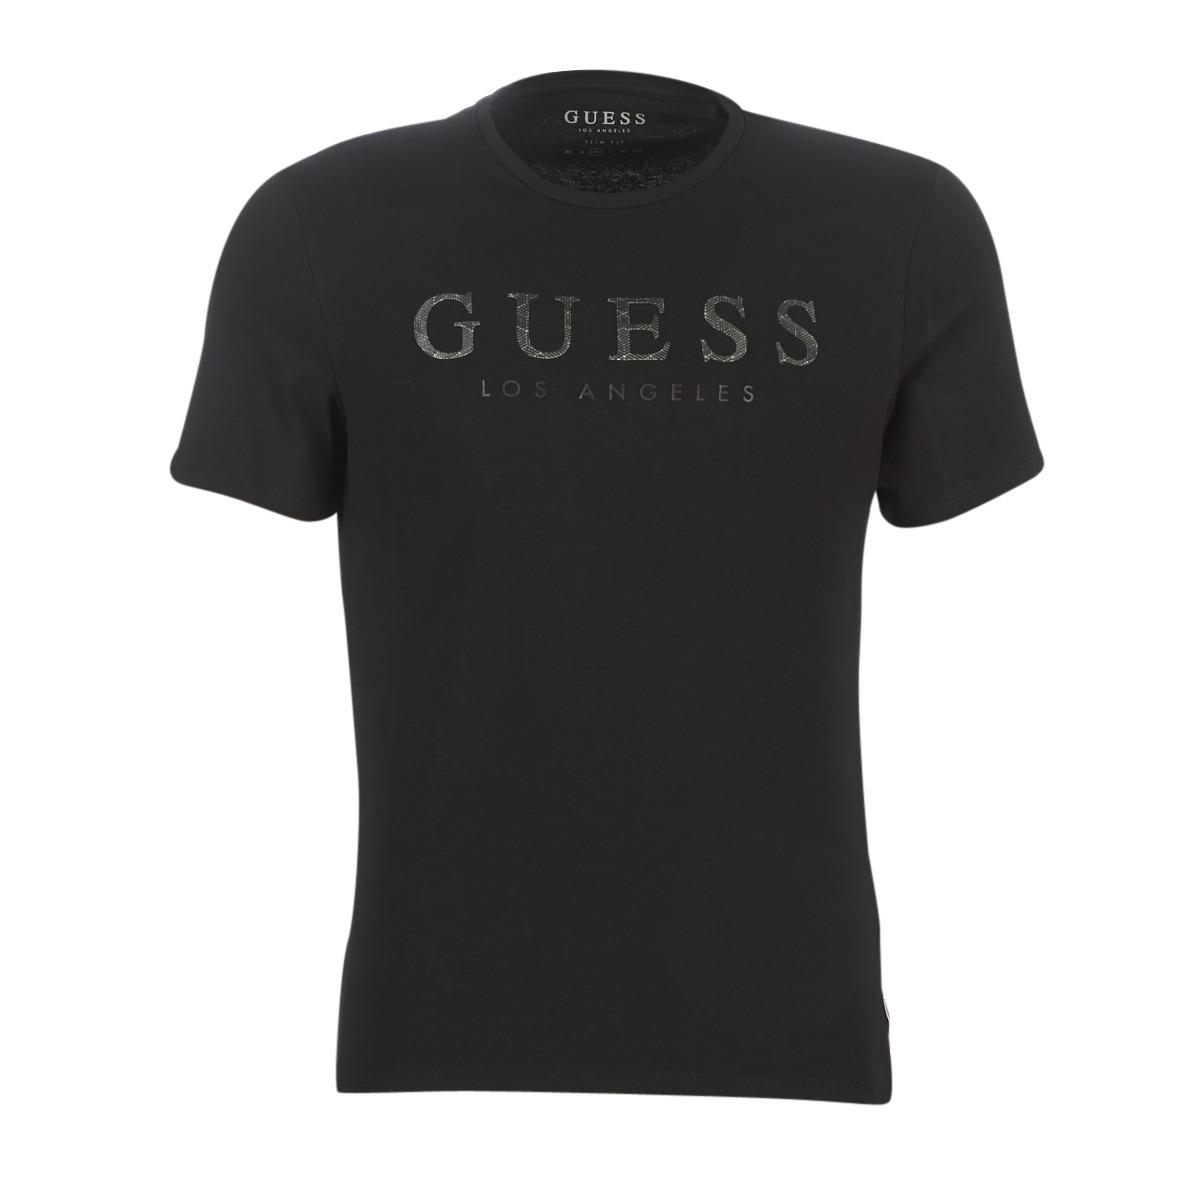 Guess Cn Ss Los Angeles Tee Men's T Shirt In Black for Men - Lyst